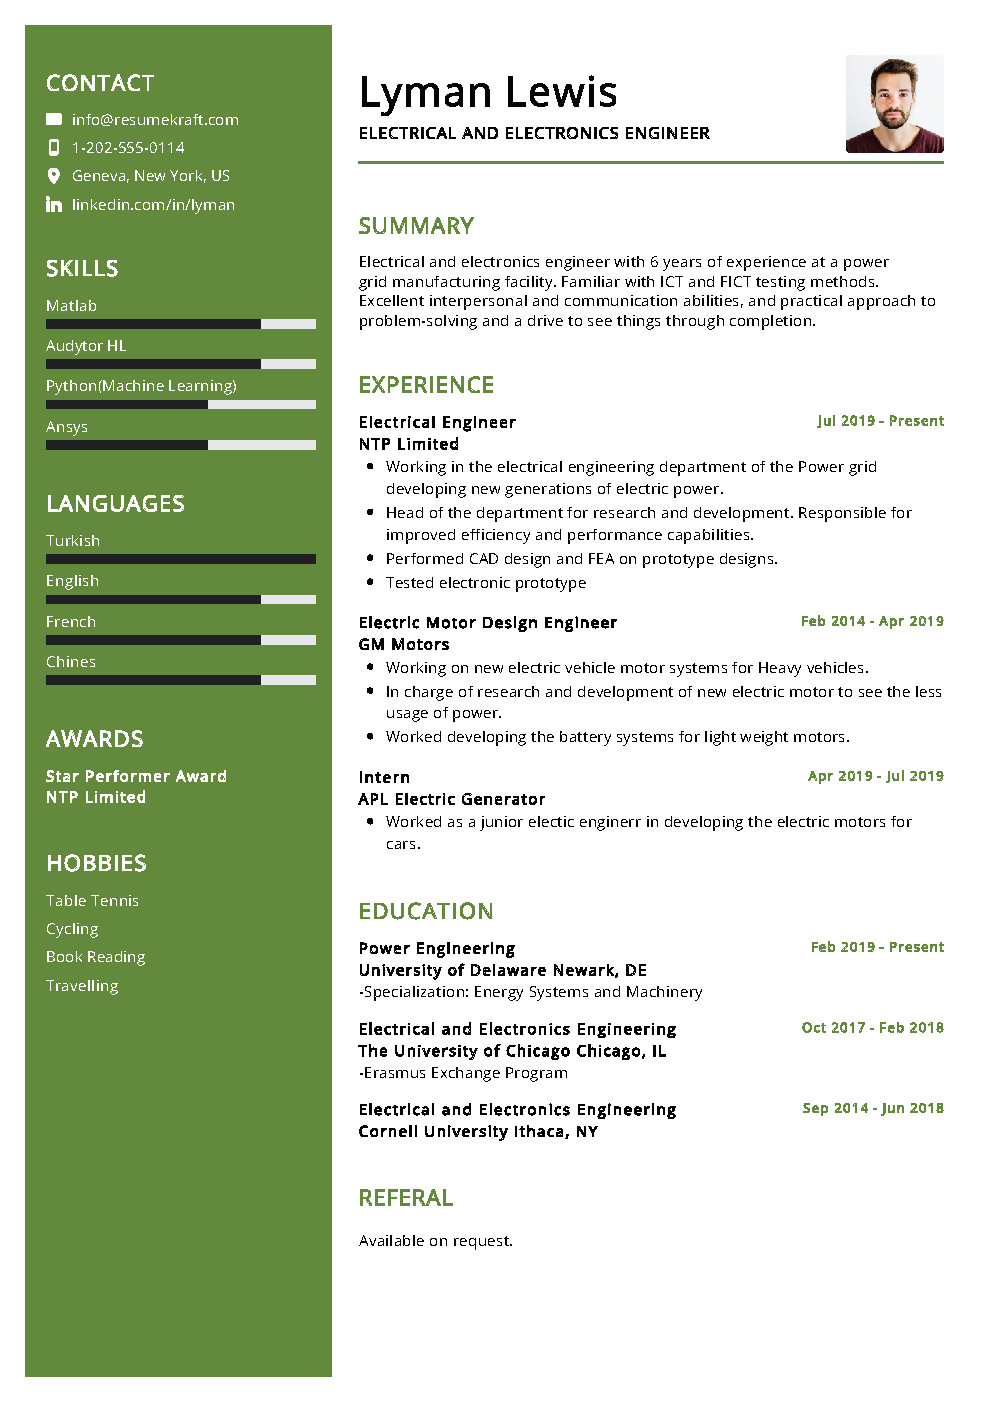 Sample Resume for Electrical and Electronics Engineer Electrical Engineer Sample Resume